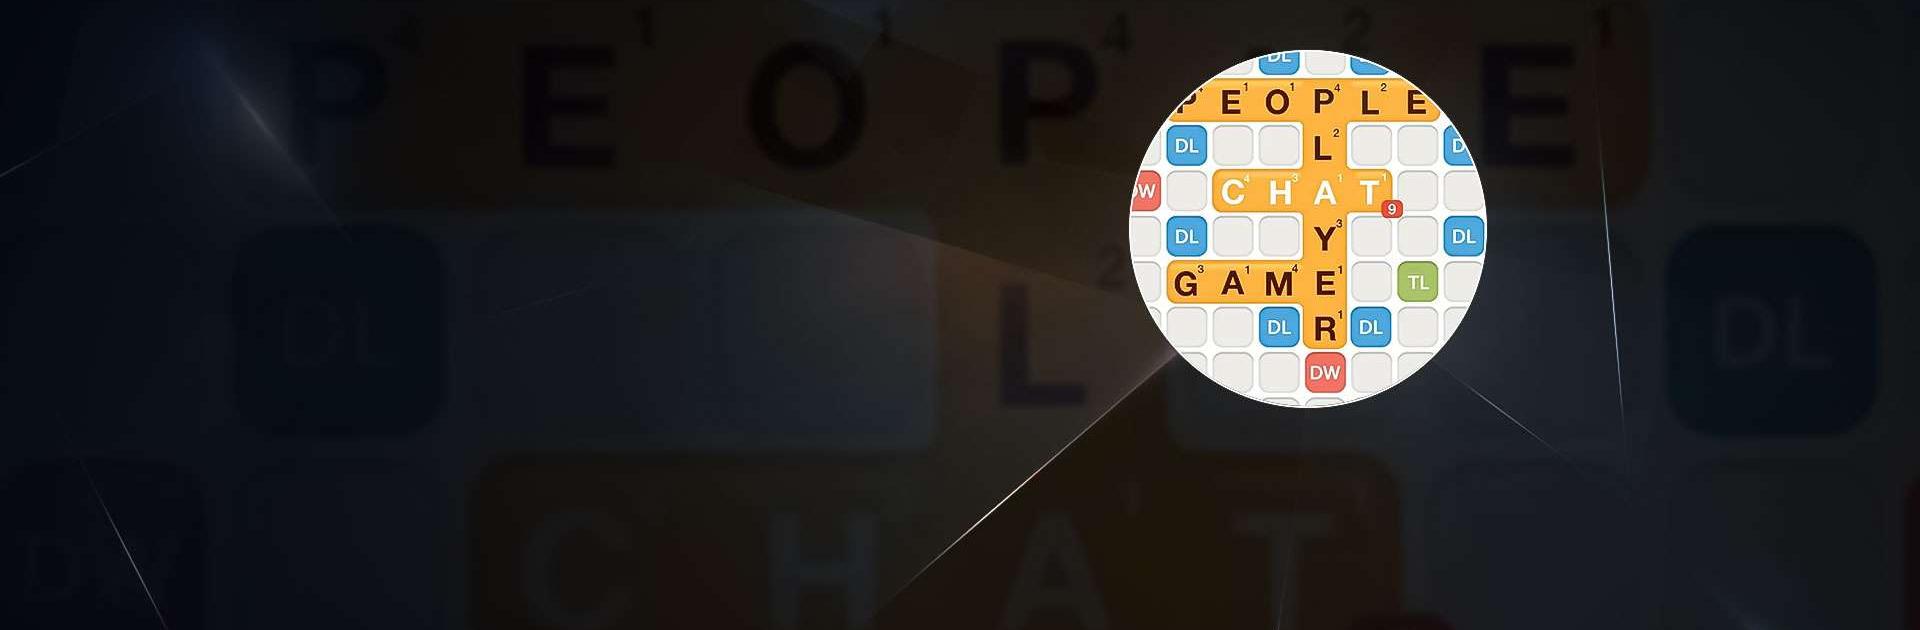 Play Words with Friends Word Puzzle Online